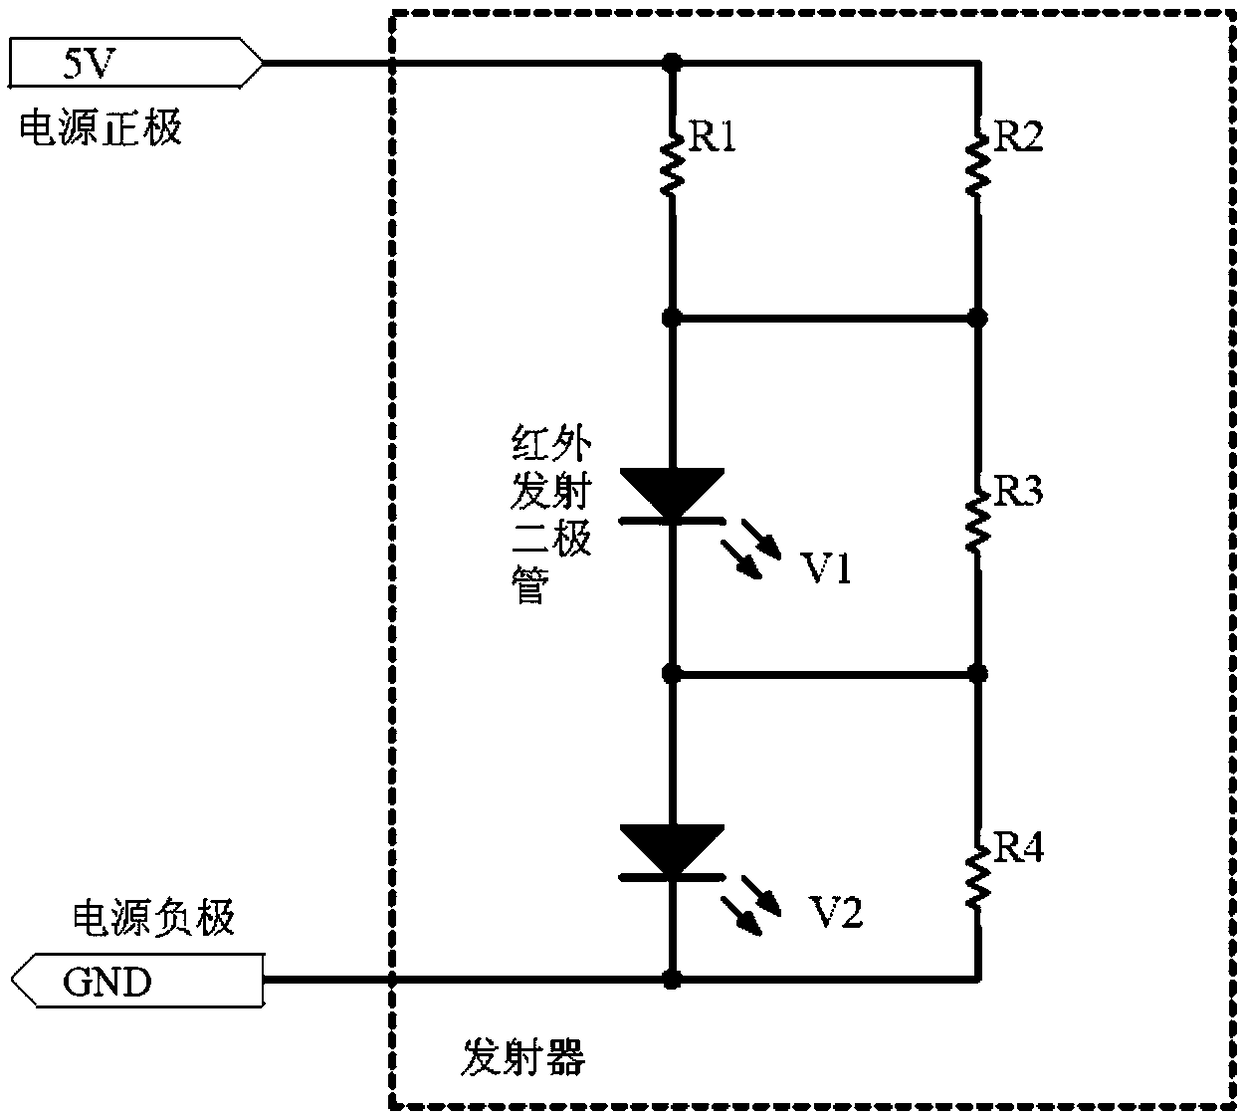 Flexible light shielding cover unfolding state detecting system